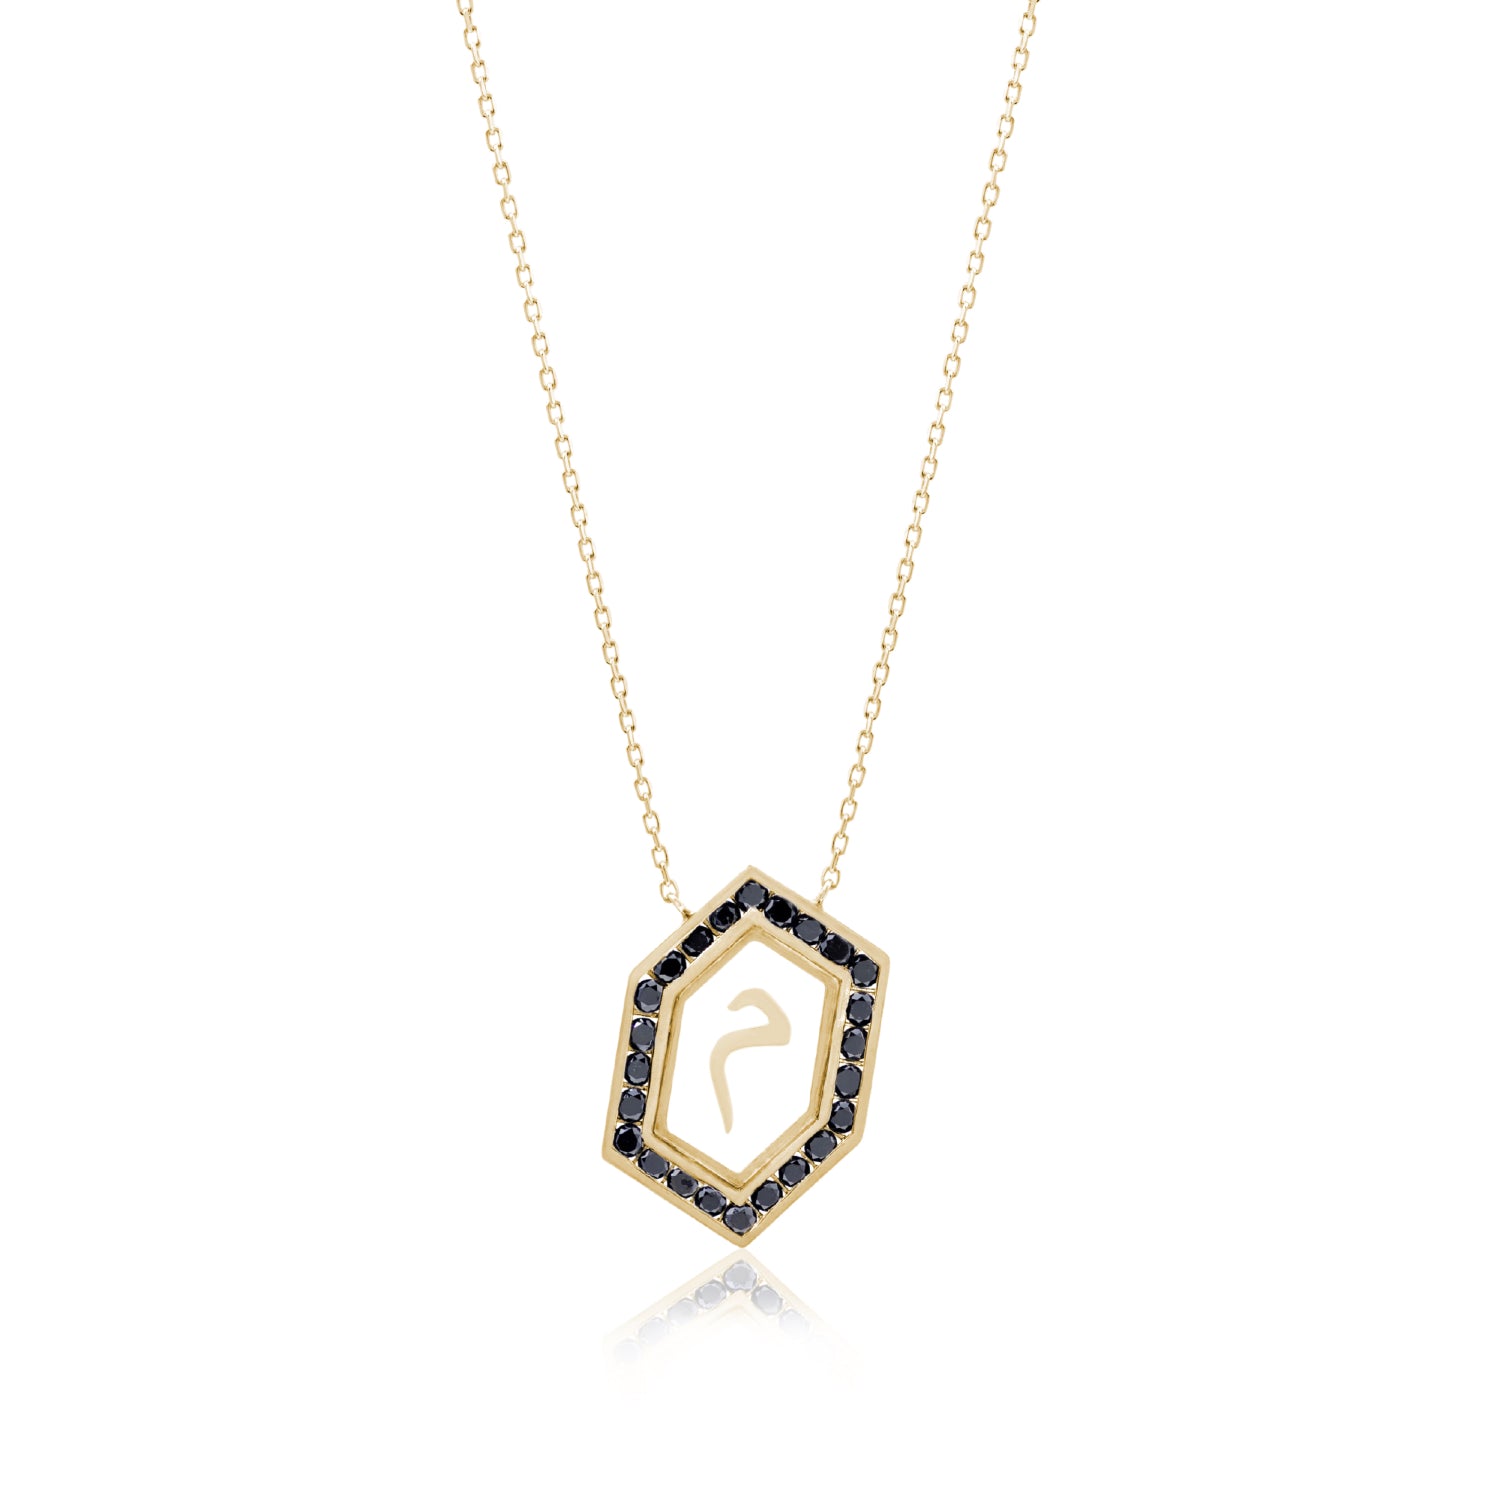 Qamoos 1.0 Letter م Black Diamond Necklace in Yellow Gold